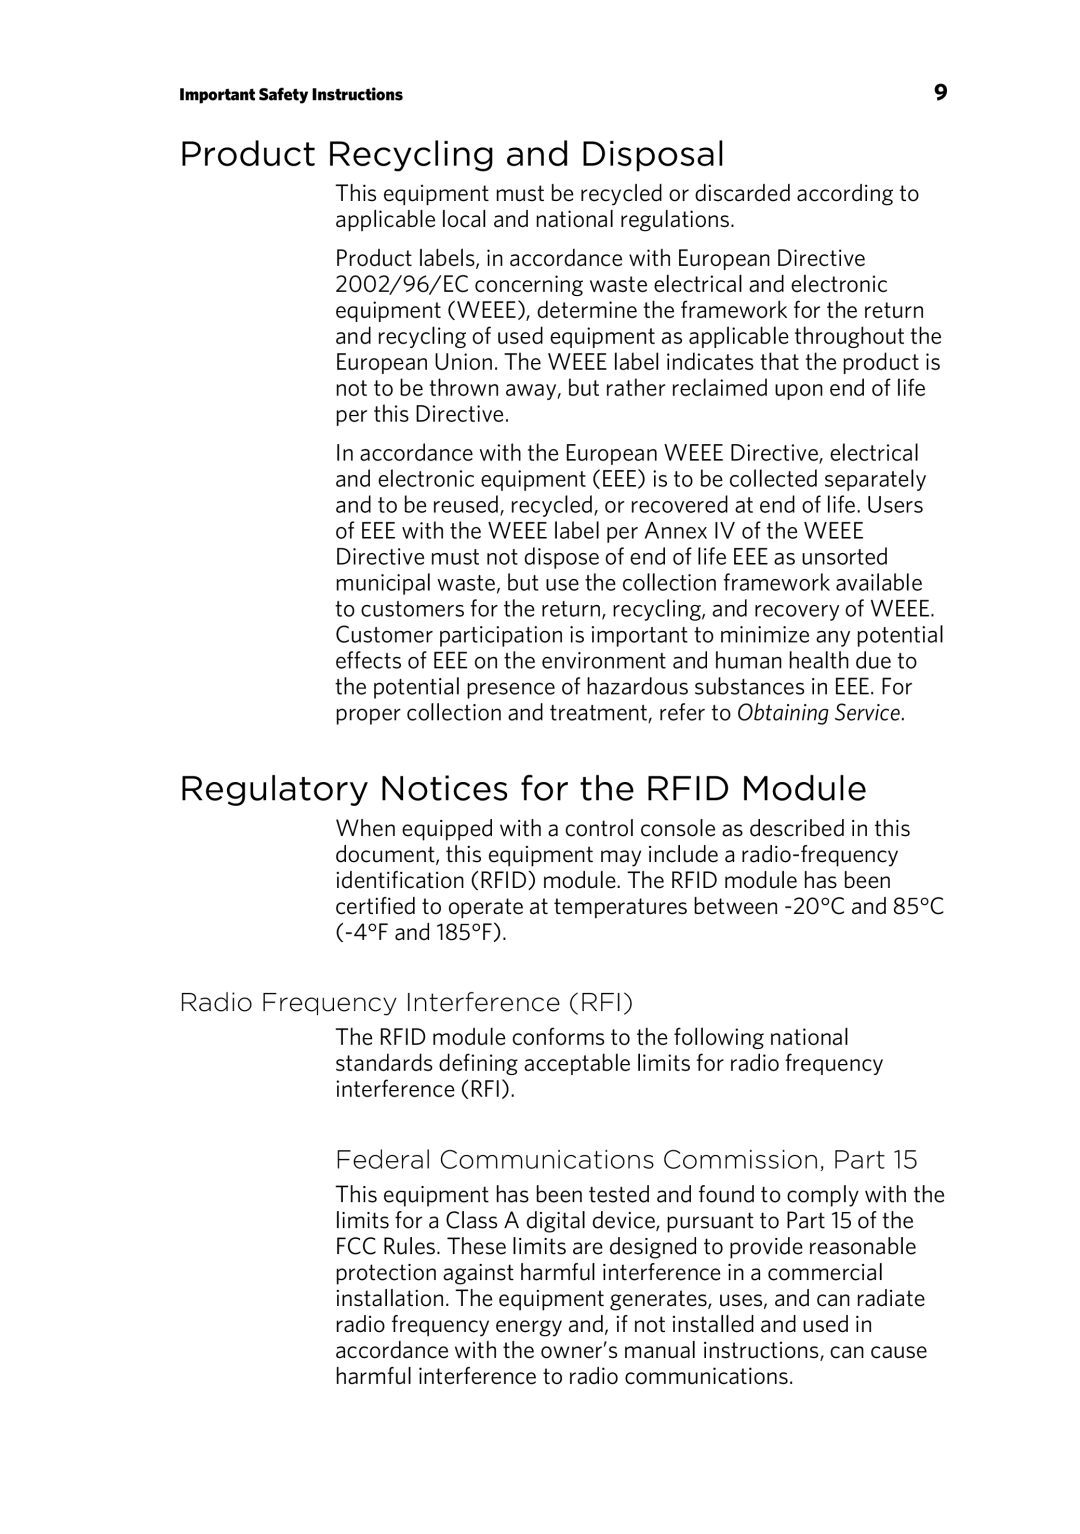 Precor P80 manual Product Recycling and Disposal, Regulatory Notices for the RFID Module, Radio Frequency Interference RFI 